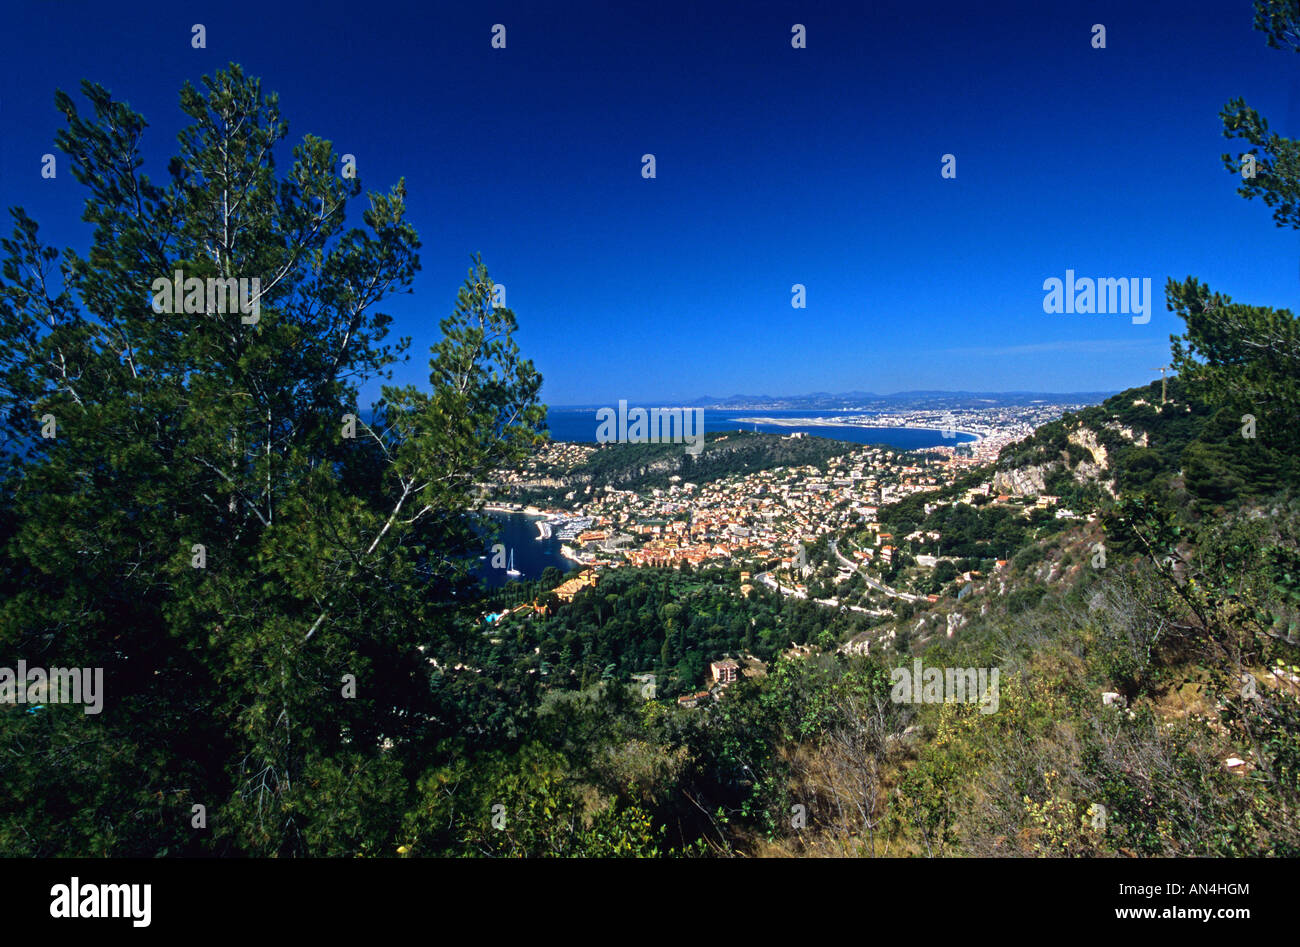 Nice Alpes-MAritimes 06 French Riviera Cote d'azur PACA France Europe Stock Photo